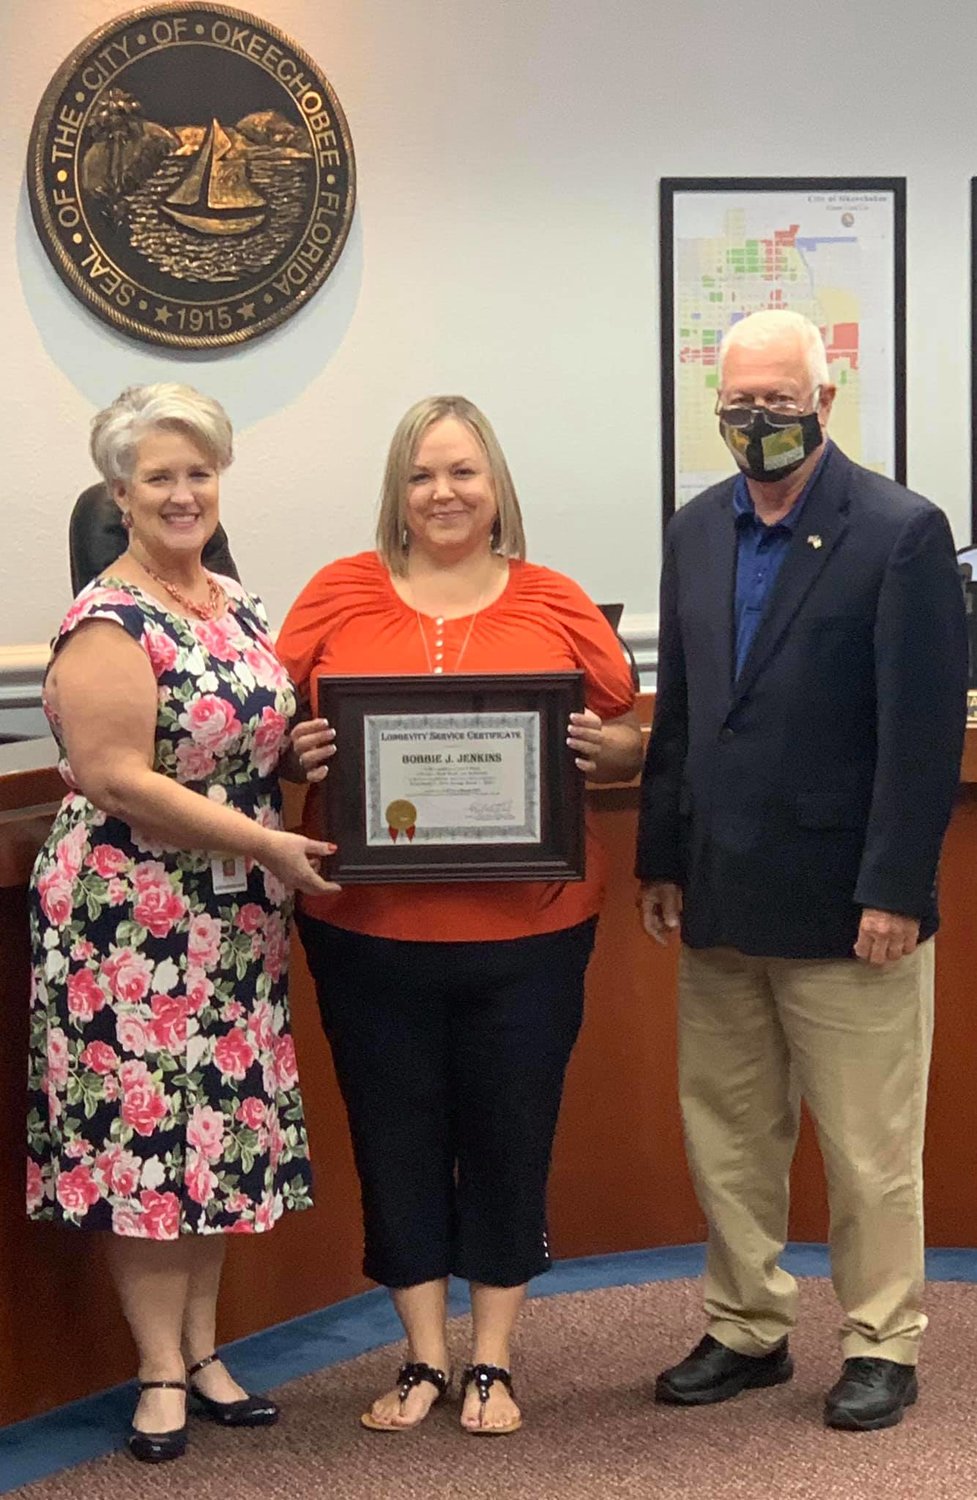 Deputy City Clerk Bobbie Jenkins (center) was honored with a 5-Year Longevity Service Award presented by Mayor Watford and City Clerk Lane Gamiotea at the March 2, 2021 City Council meeting.